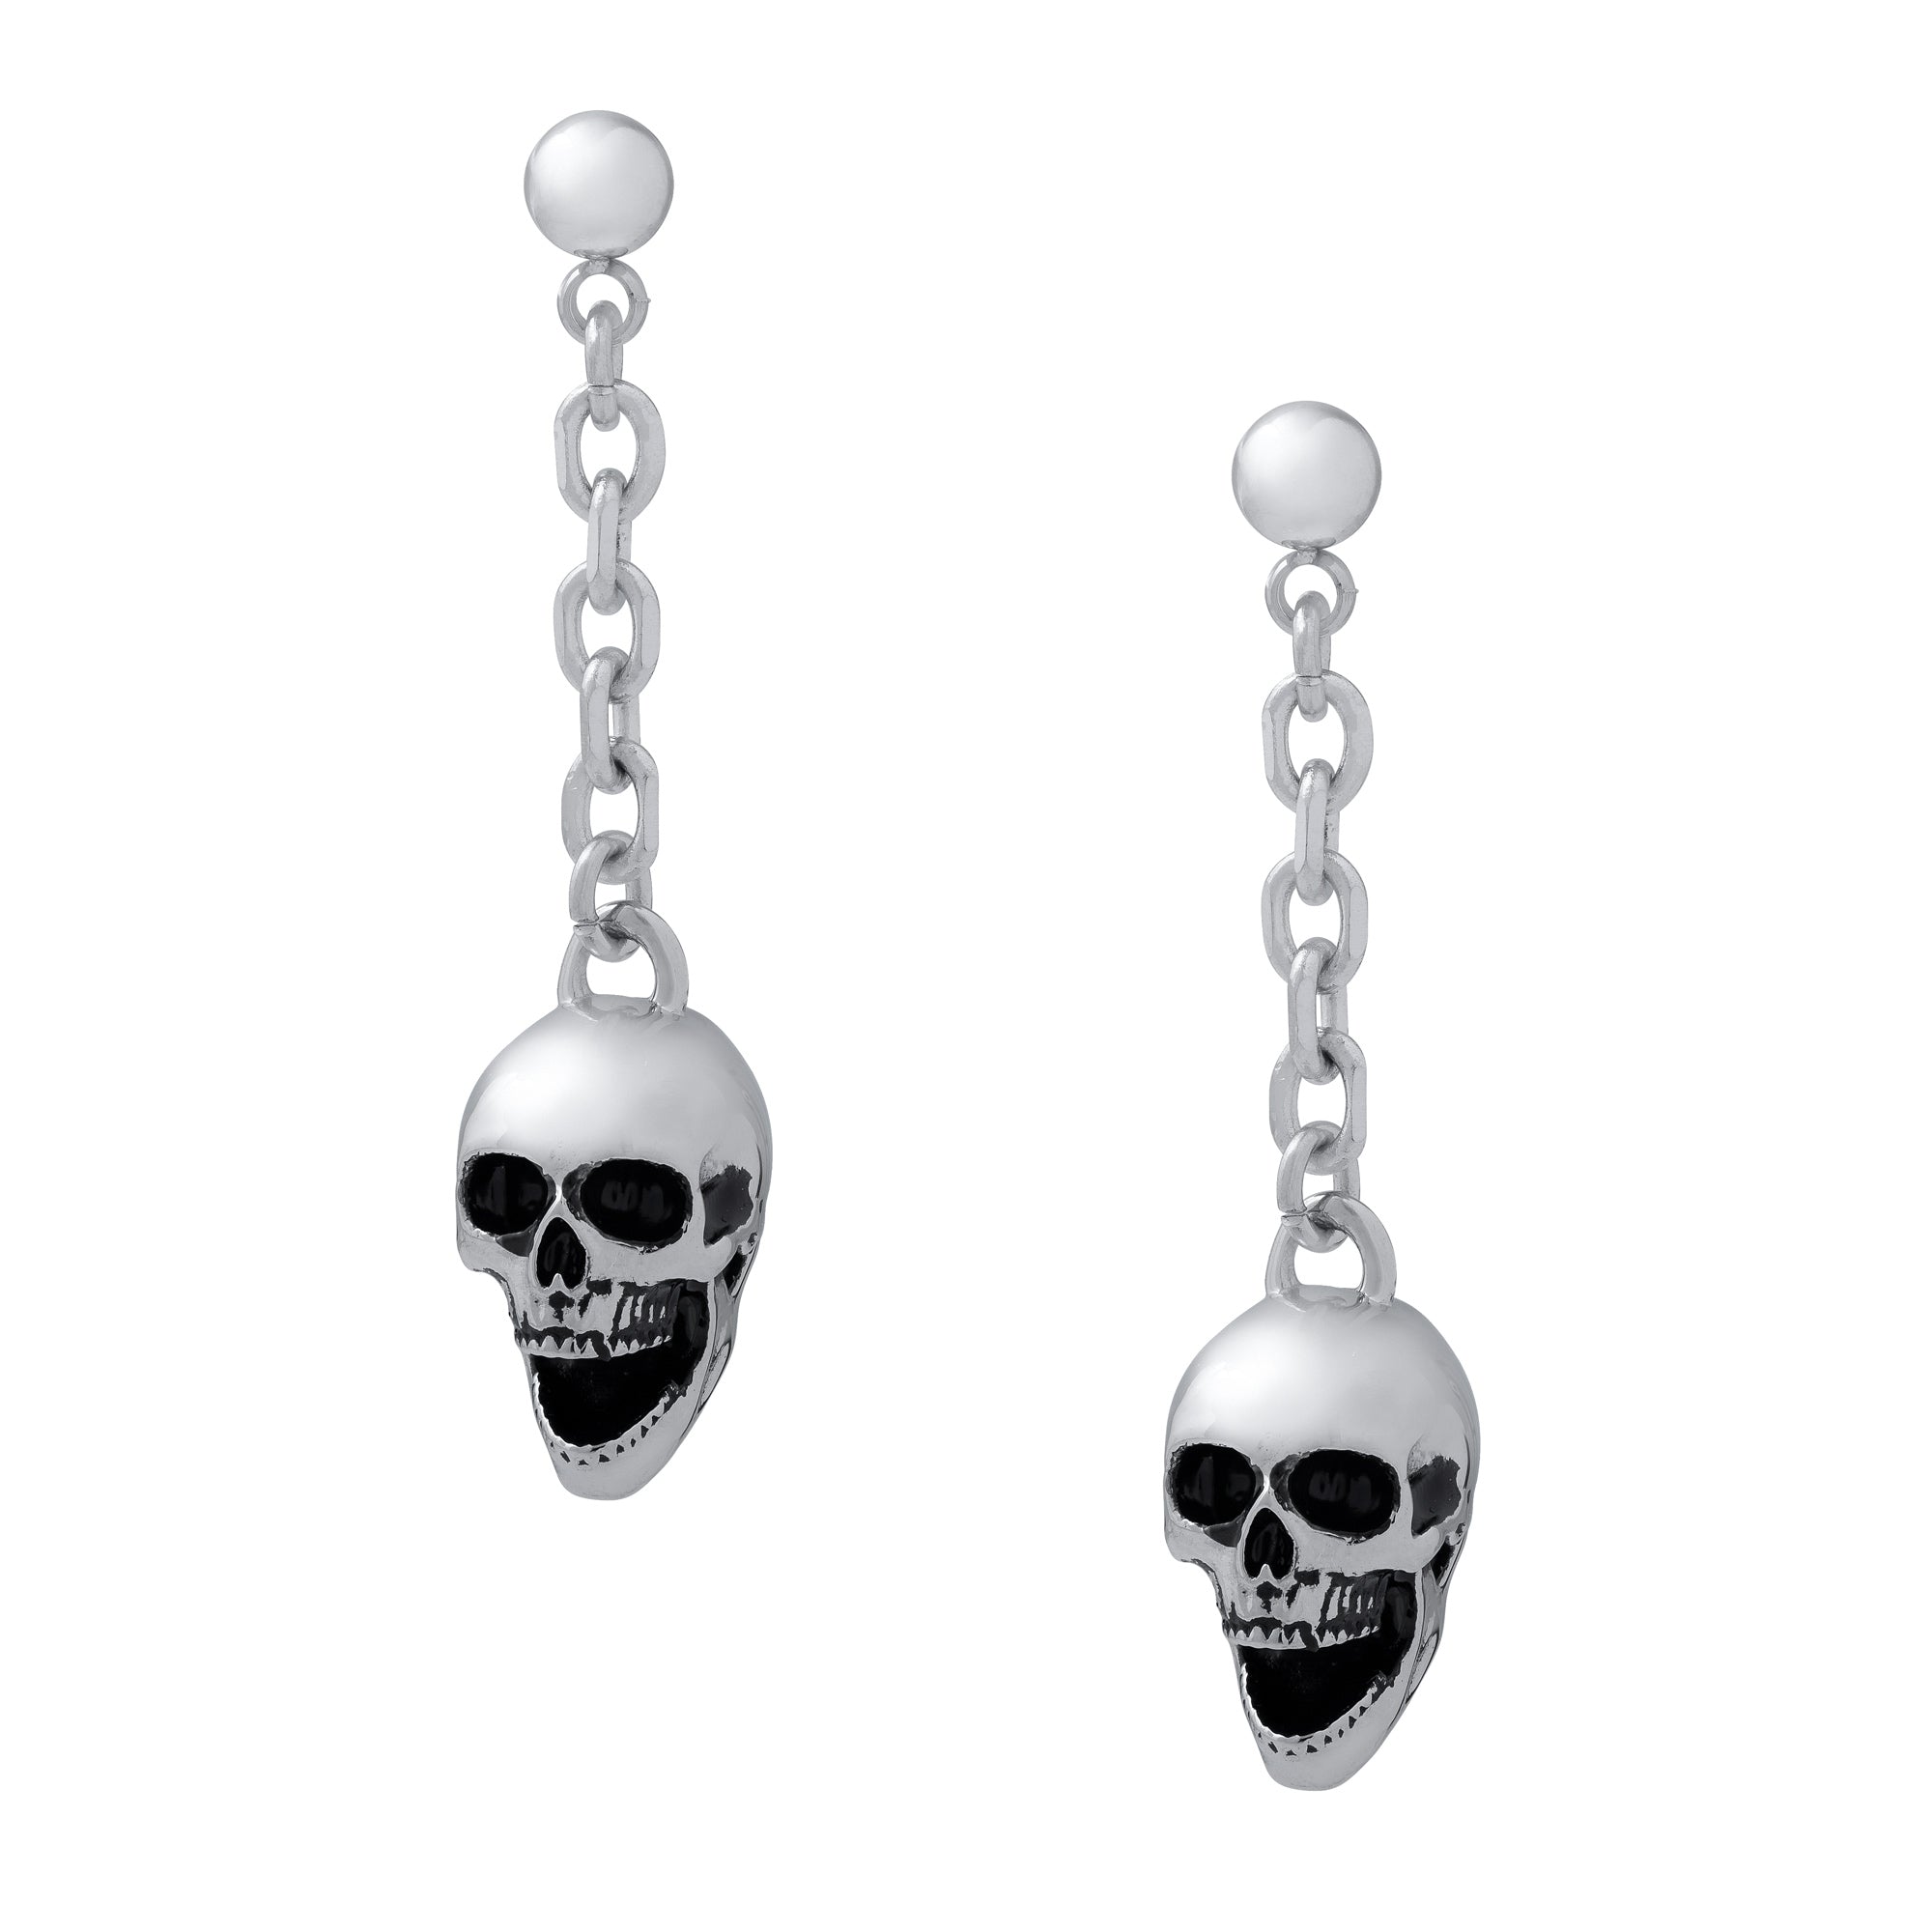 Punk earrings skull with chain in silver